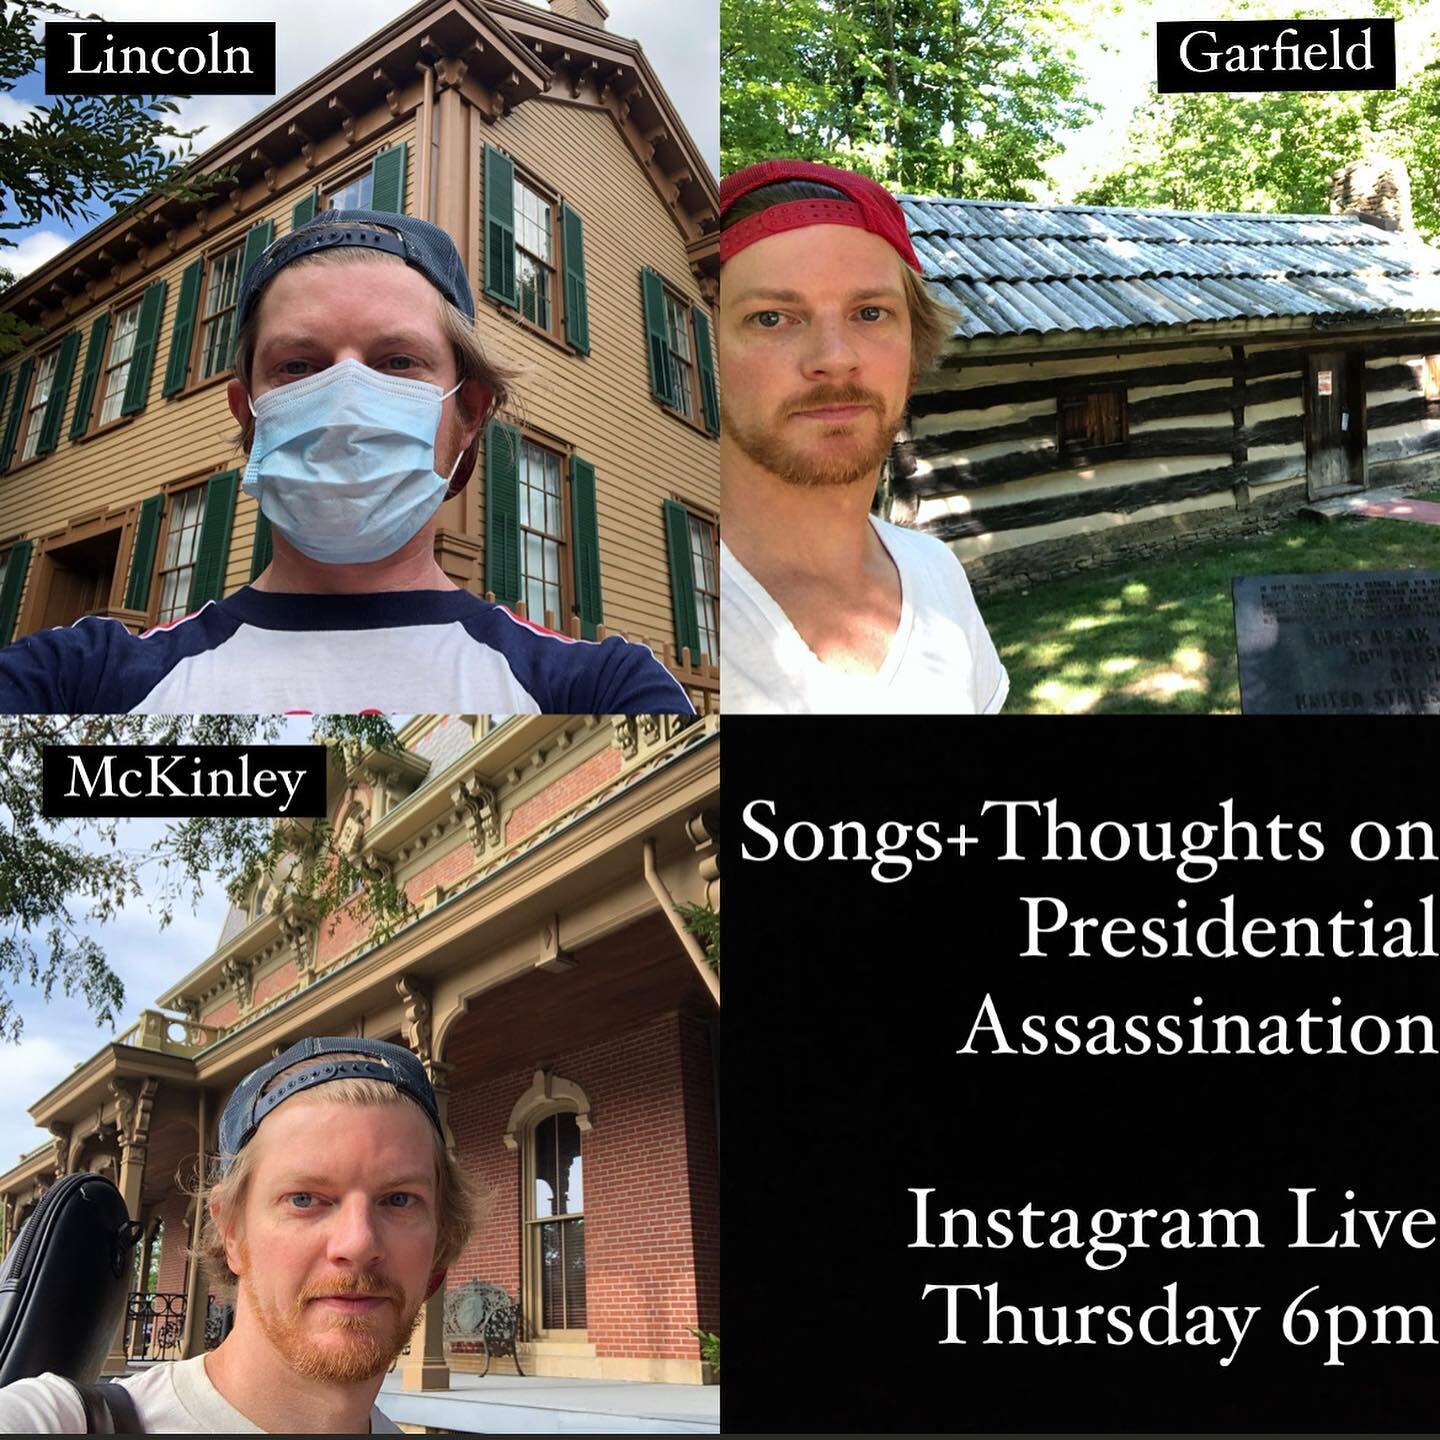 157 years ago this week, John Wilkes Booth committed the first Presidential Assassination at Ford&rsquo;s Theater, just days after the Civil War ended. Join me on Instagram Live THURSDAY (4/13) 6pm PST, I&rsquo;ll be sharing some new songs I&rsquo;ve